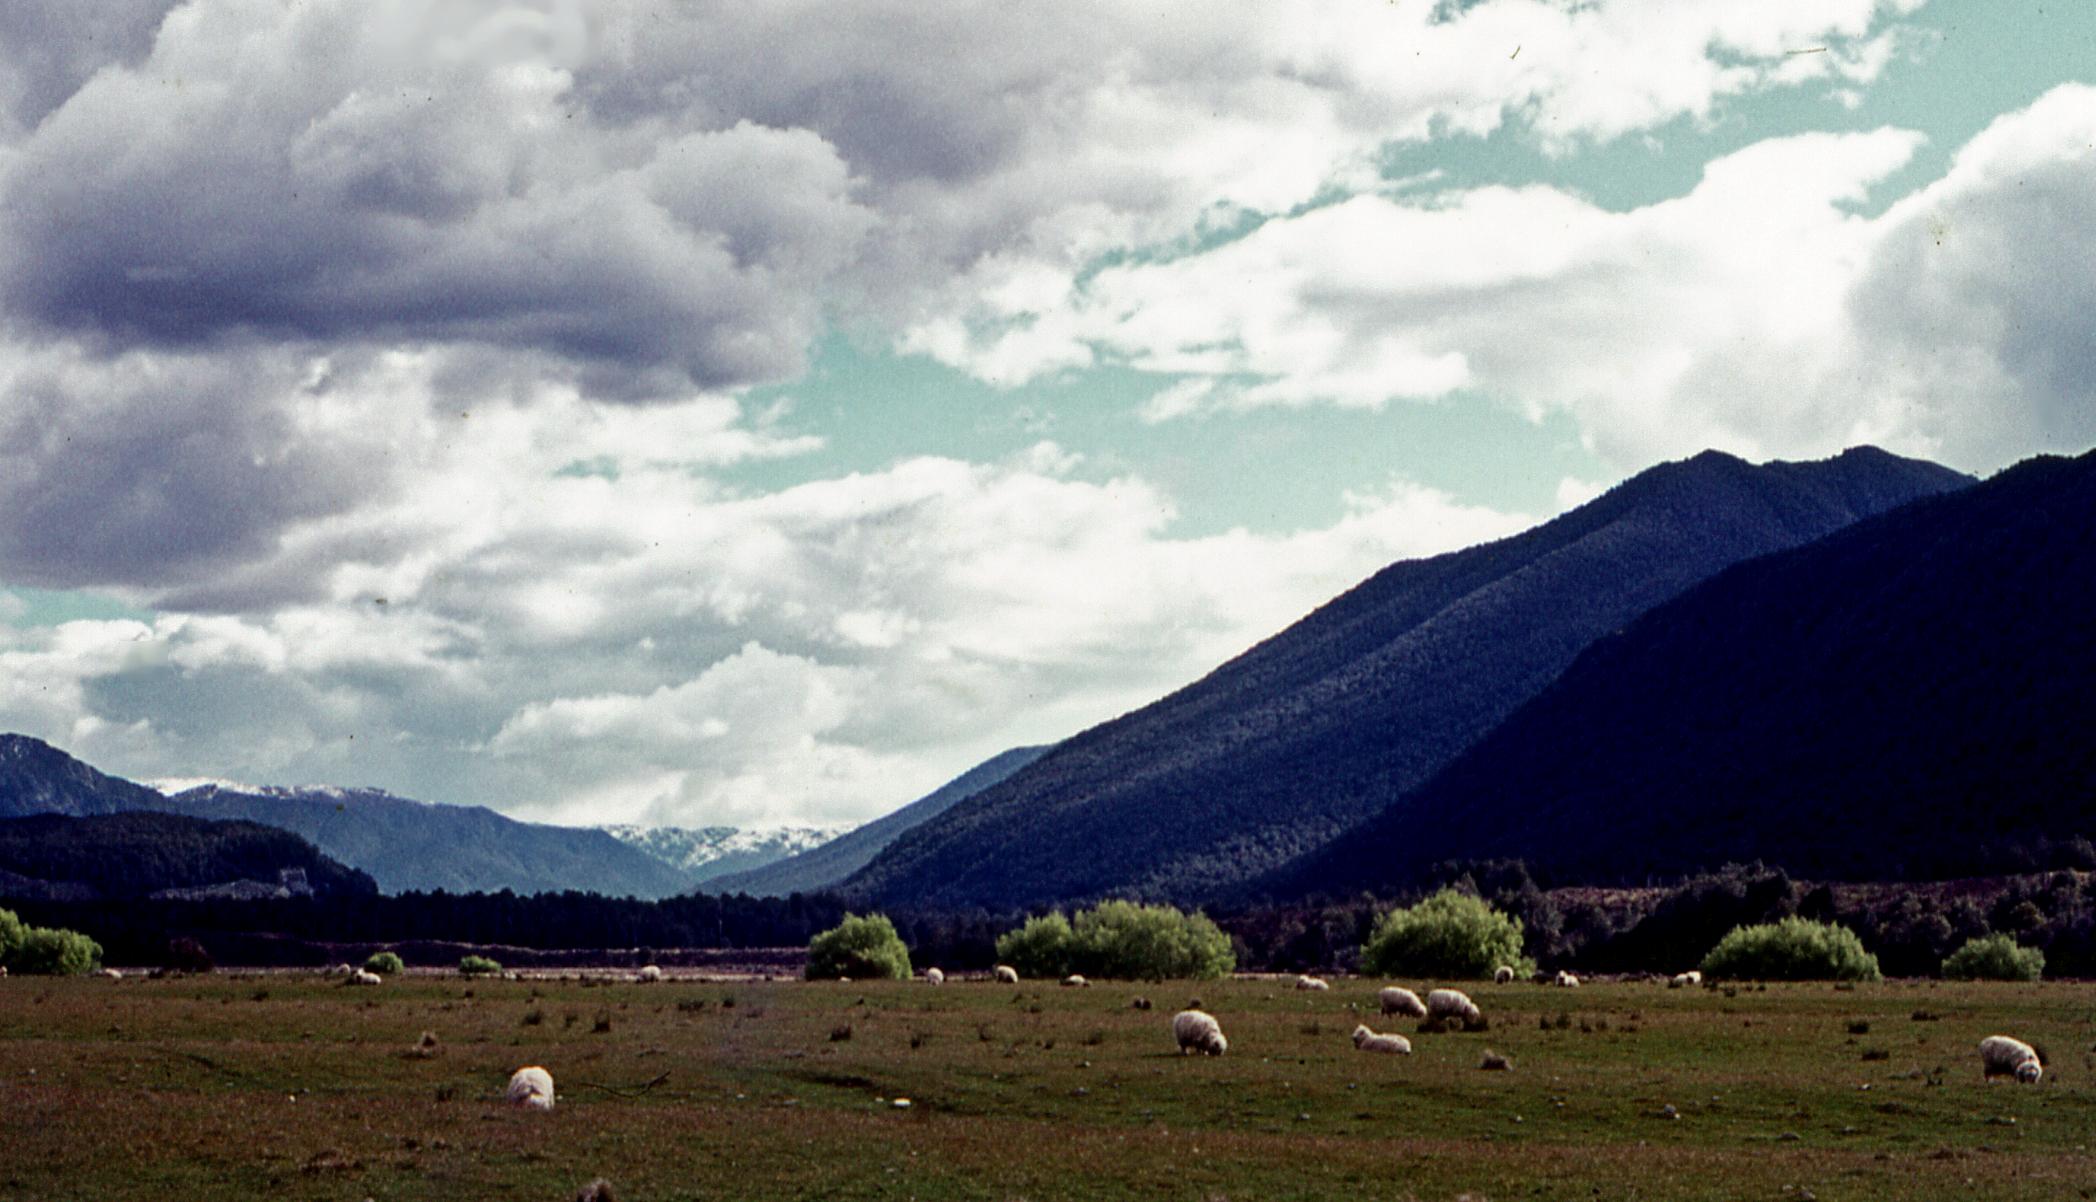 there are many animals grazing in a field with mountains behind them